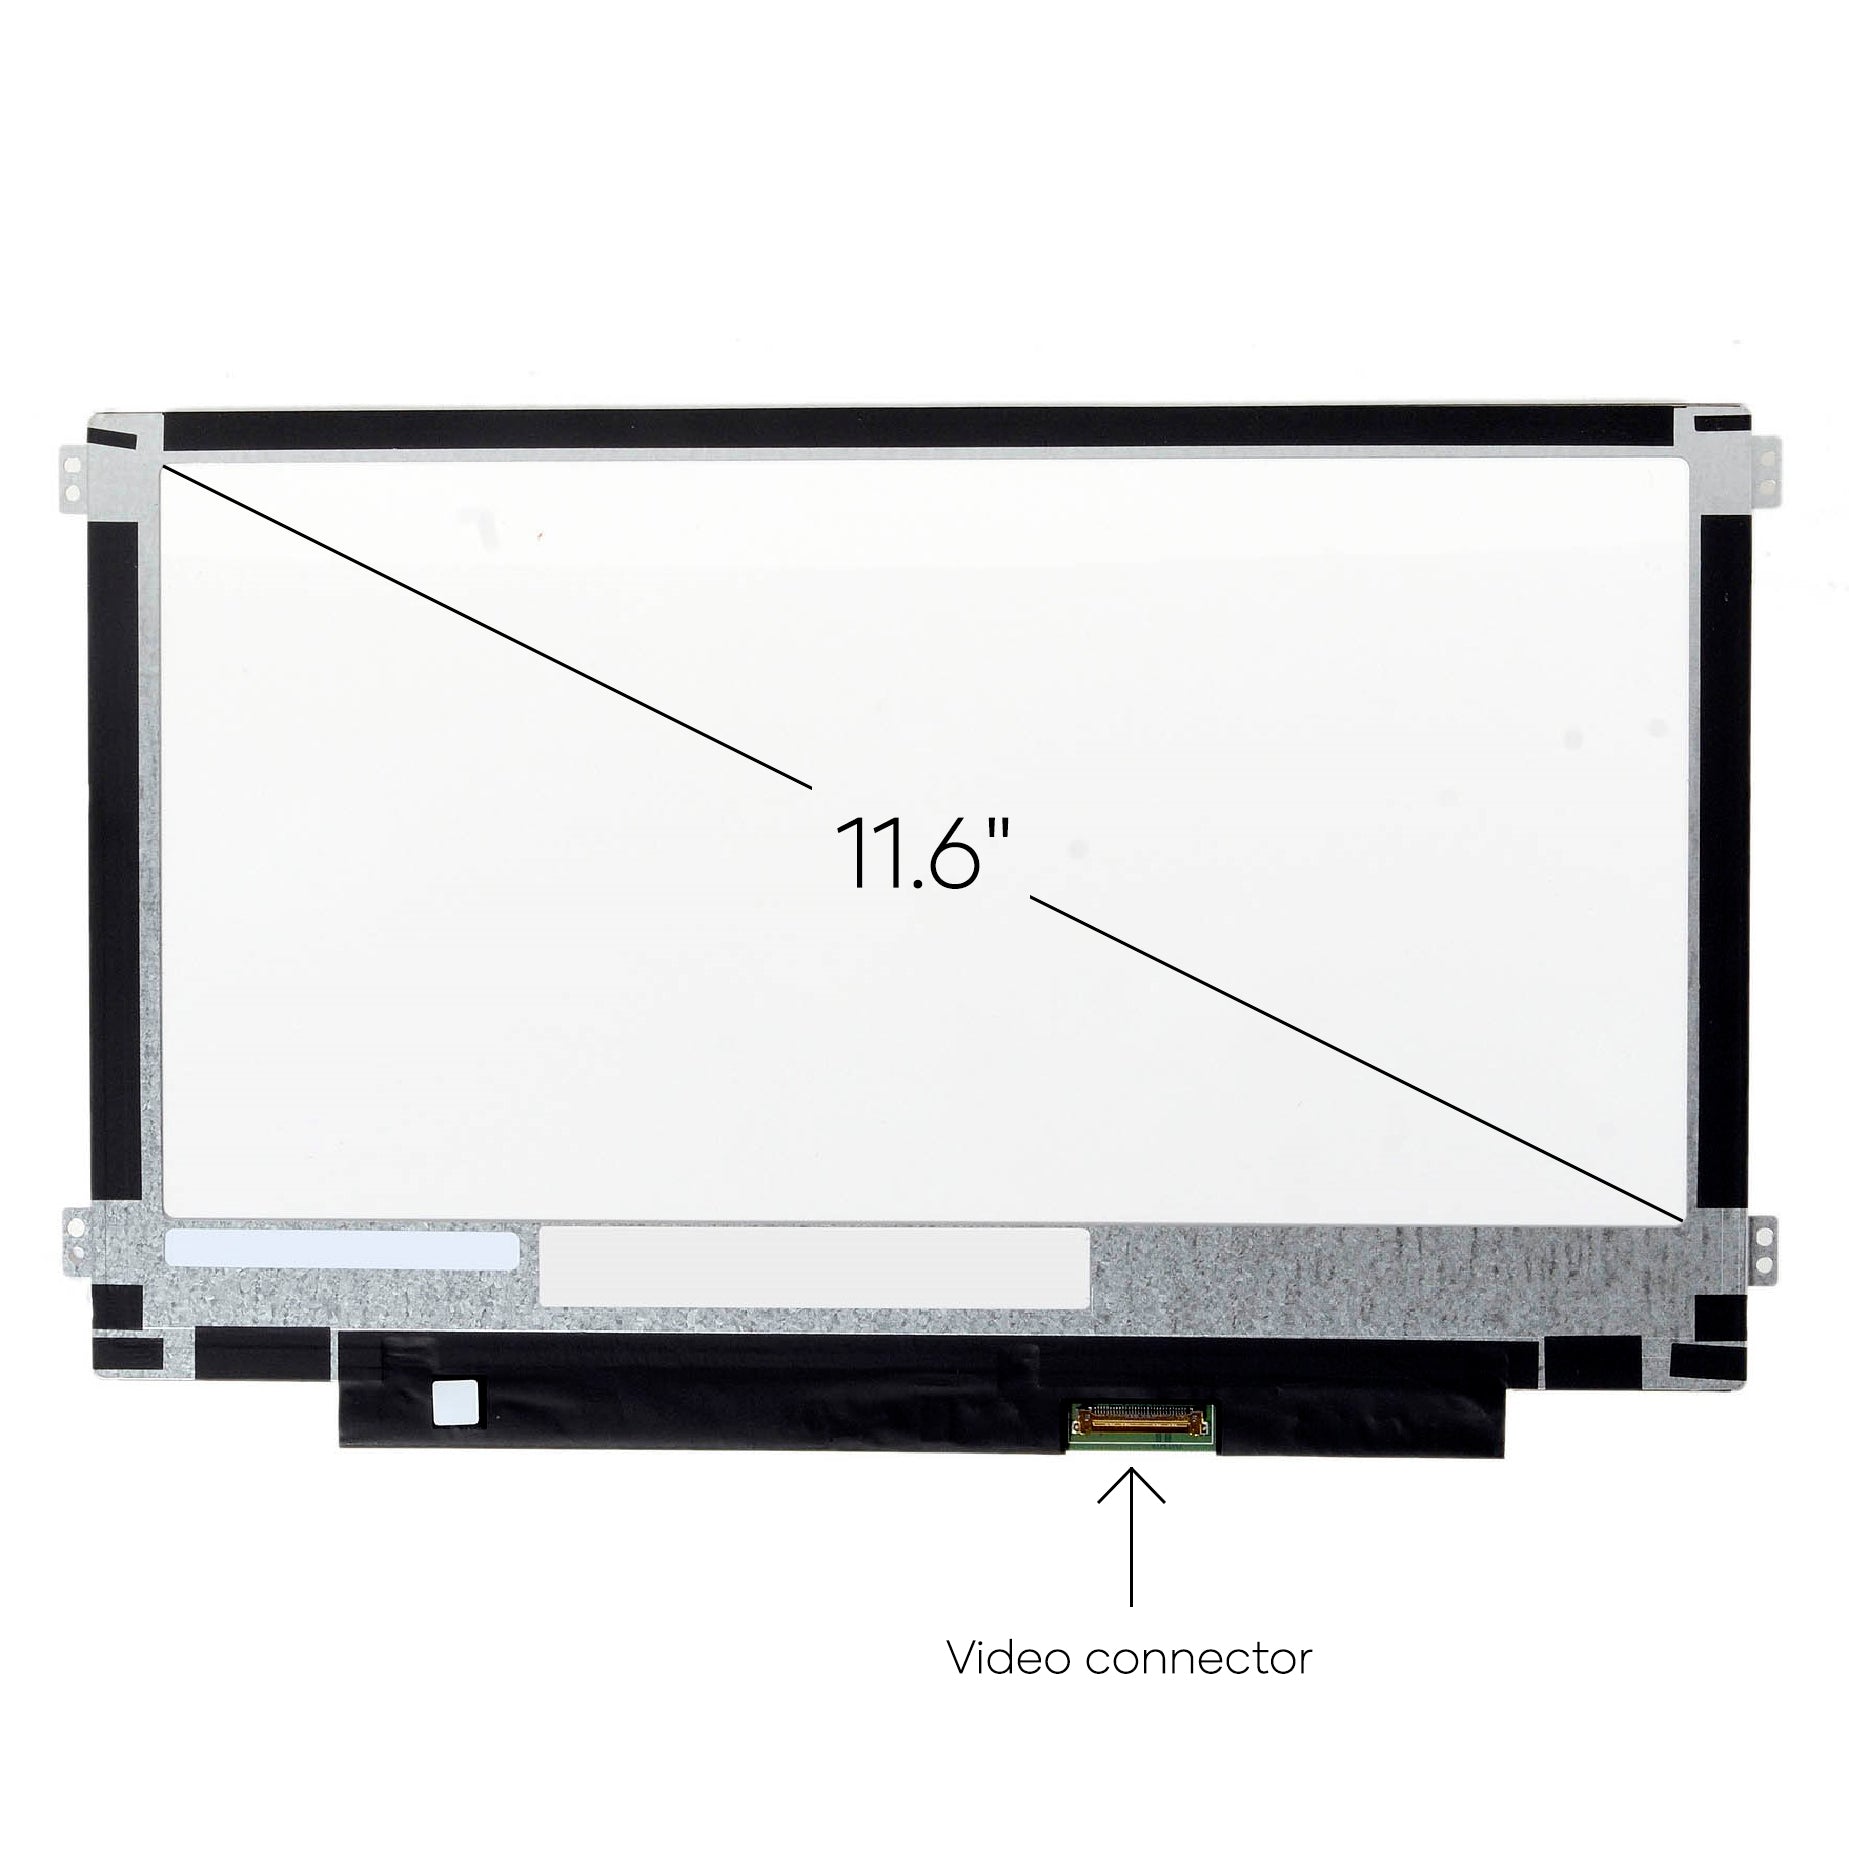 Screen Replacement for Samsung Chromebook XE500C13-K01US HD 1366x768 Matte LCD LED Display